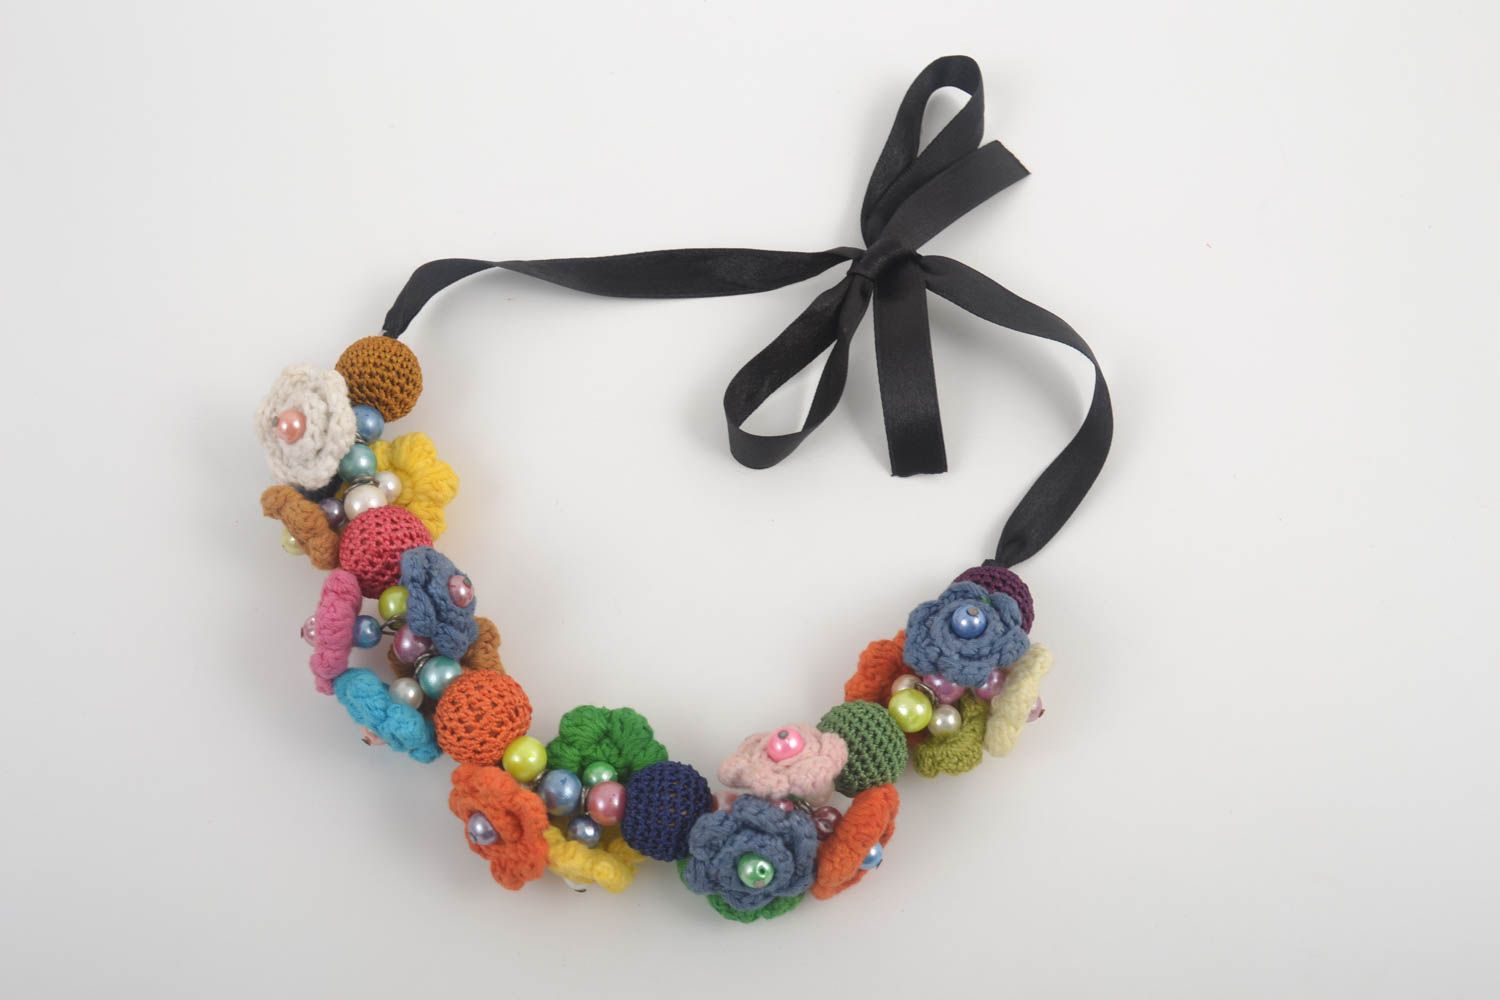 Handmade crocheted necklace hand-crocheted jewelry necklace with textile flowers photo 2